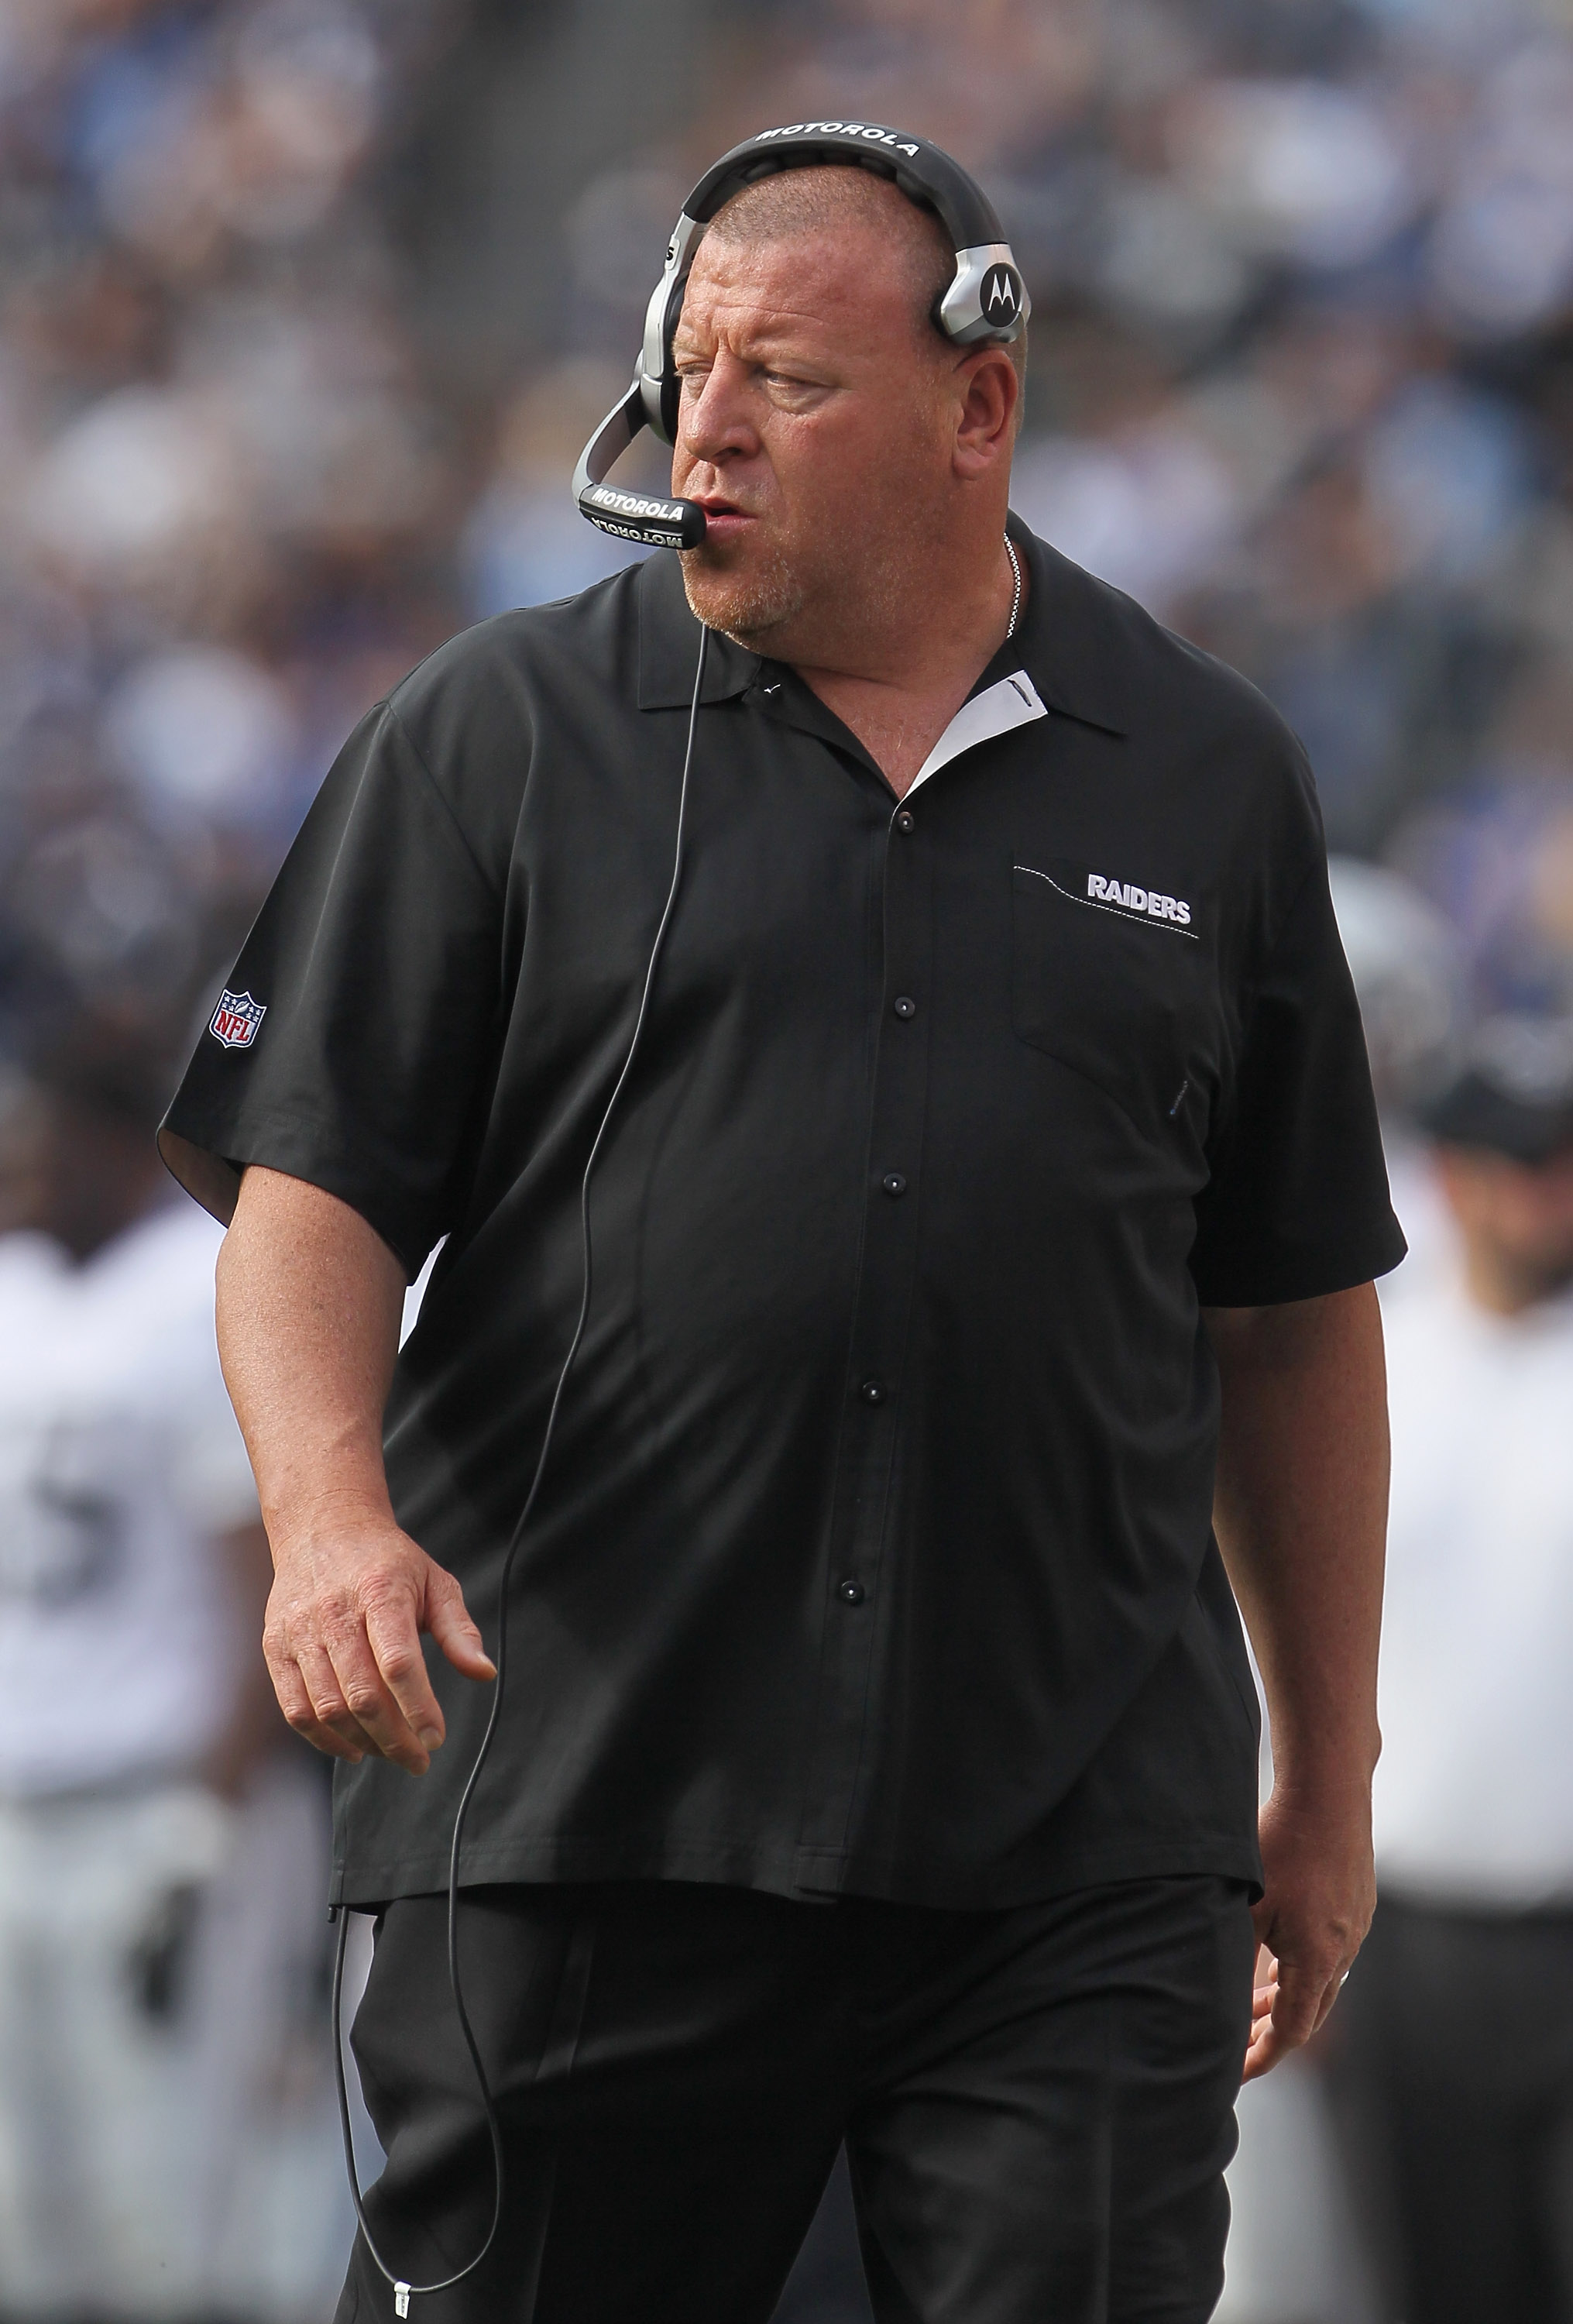 SAN DIEGO - DECEMBER 05:  Oakland Raiders head coach Tom Cable looks on from the sideline during the first half against the San Diego Chargers at Qualcomm Stadium on December 5, 2010 in San Diego, California. The Raiders defeated the Chargers 28-13.  (Pho